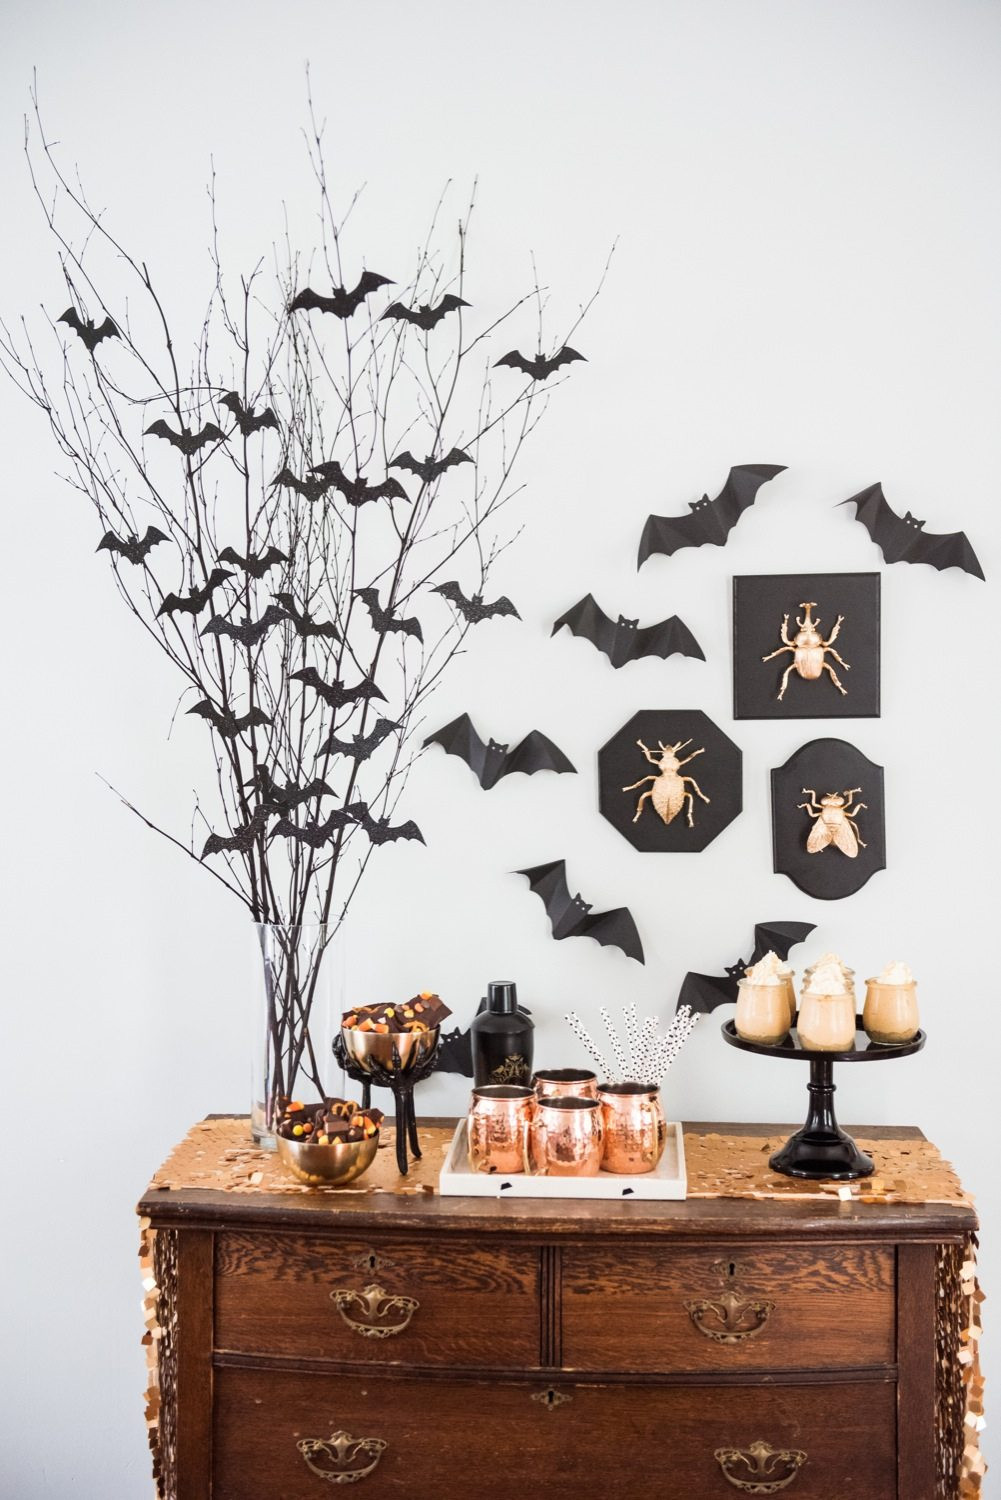 Diy Halloween Party Ideas Decorations
 Easy Spooky Halloween Party Decor The Sweetest Occasion